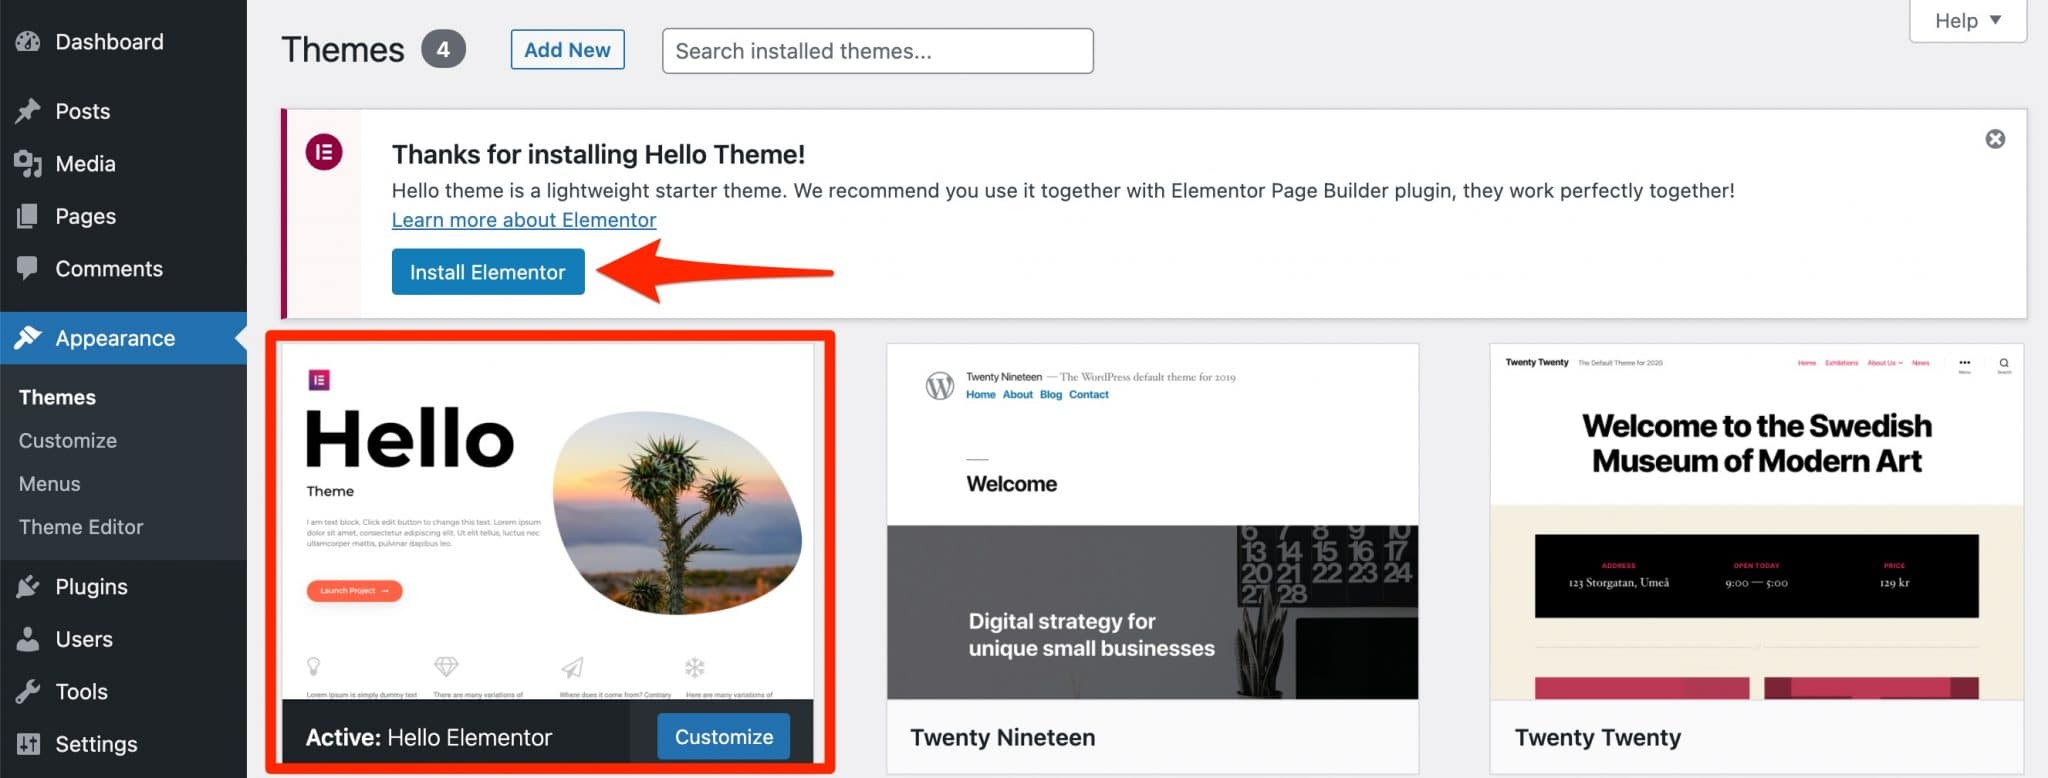 Activation of the Hello Elementor theme followed by the recommendation to install the Elementor page builder.